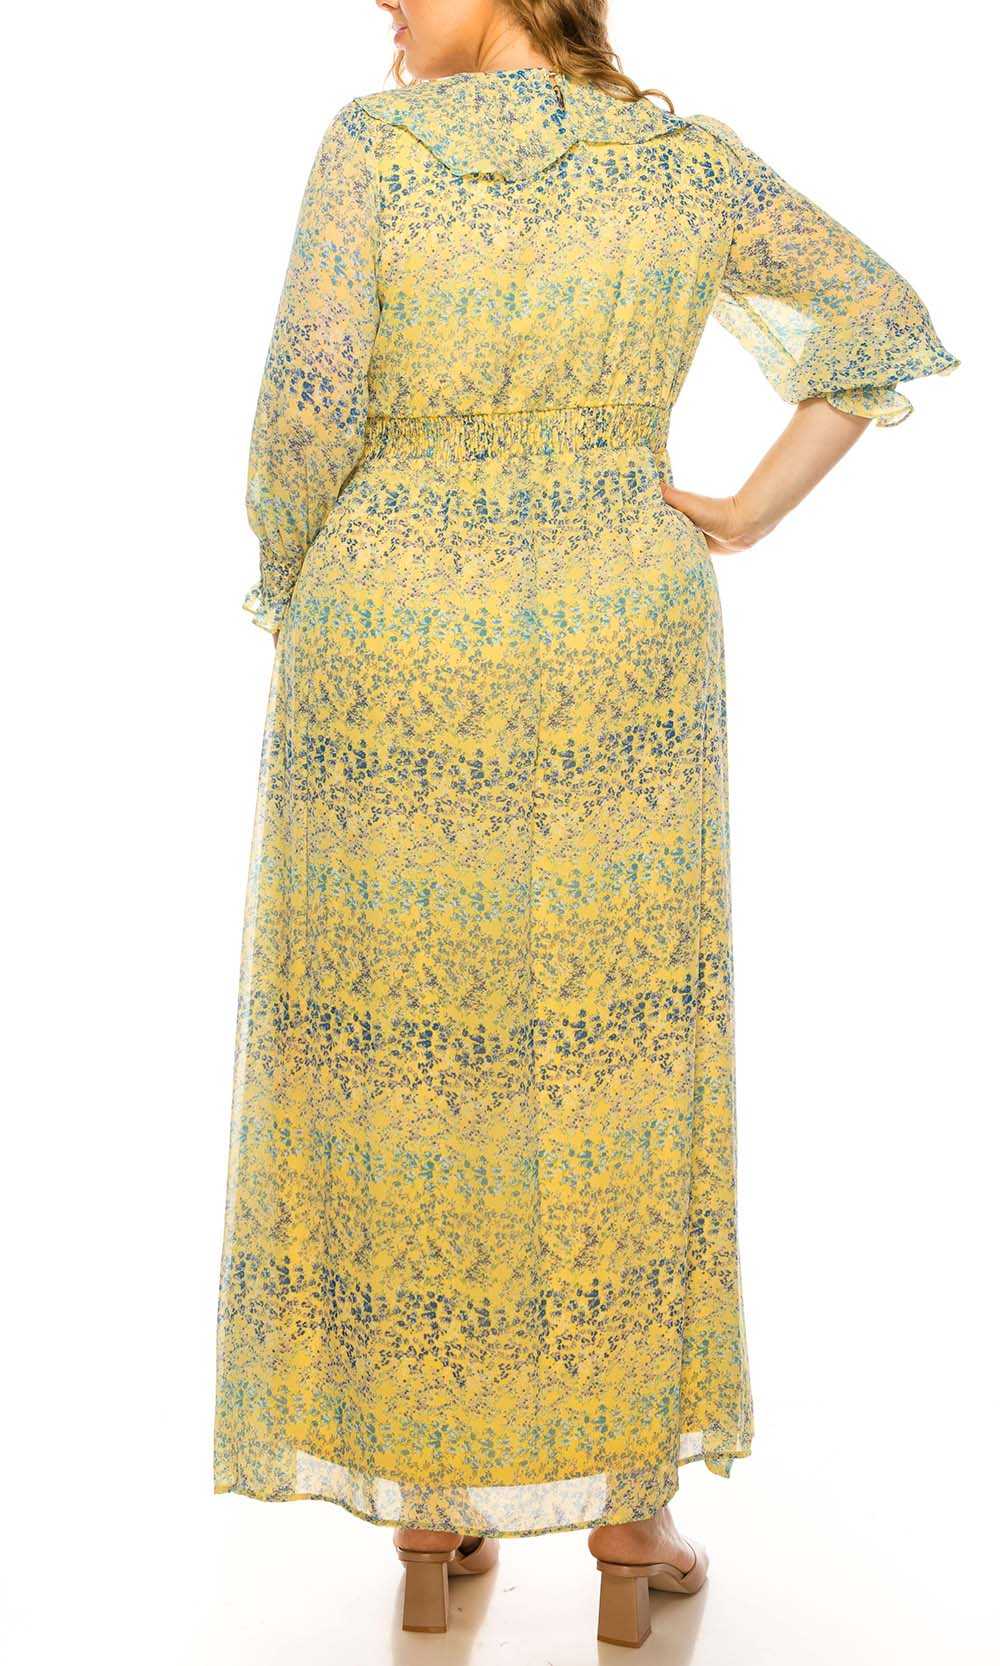 Shelby & Palmer, Shelby & Palmer - M565 Floral Printed Full Length Dress